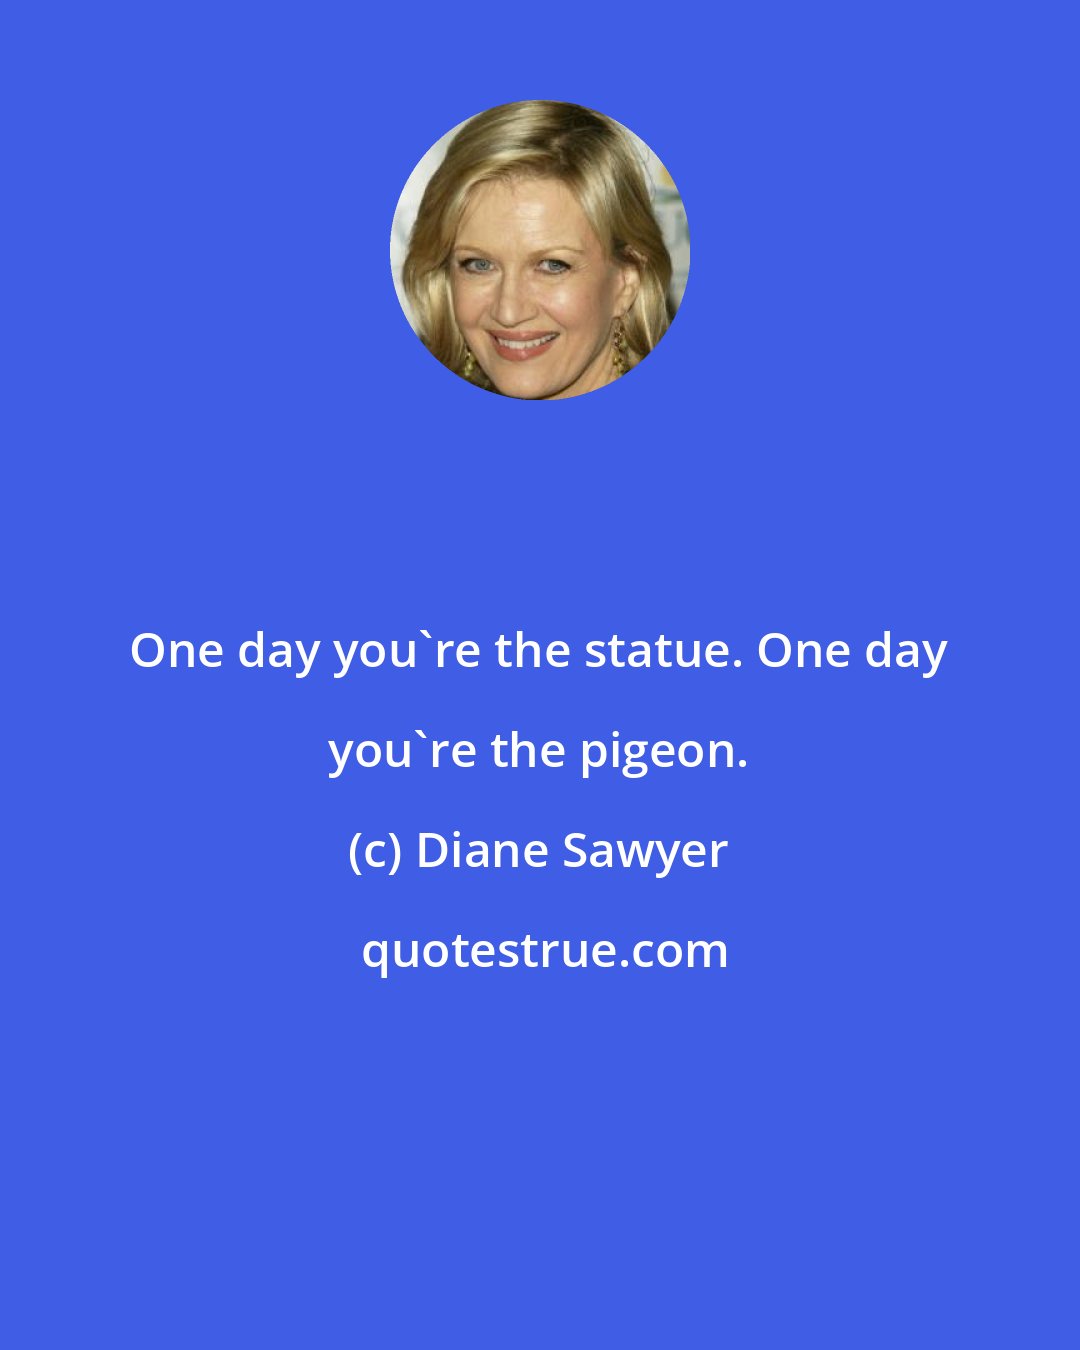 Diane Sawyer: One day you're the statue. One day you're the pigeon.